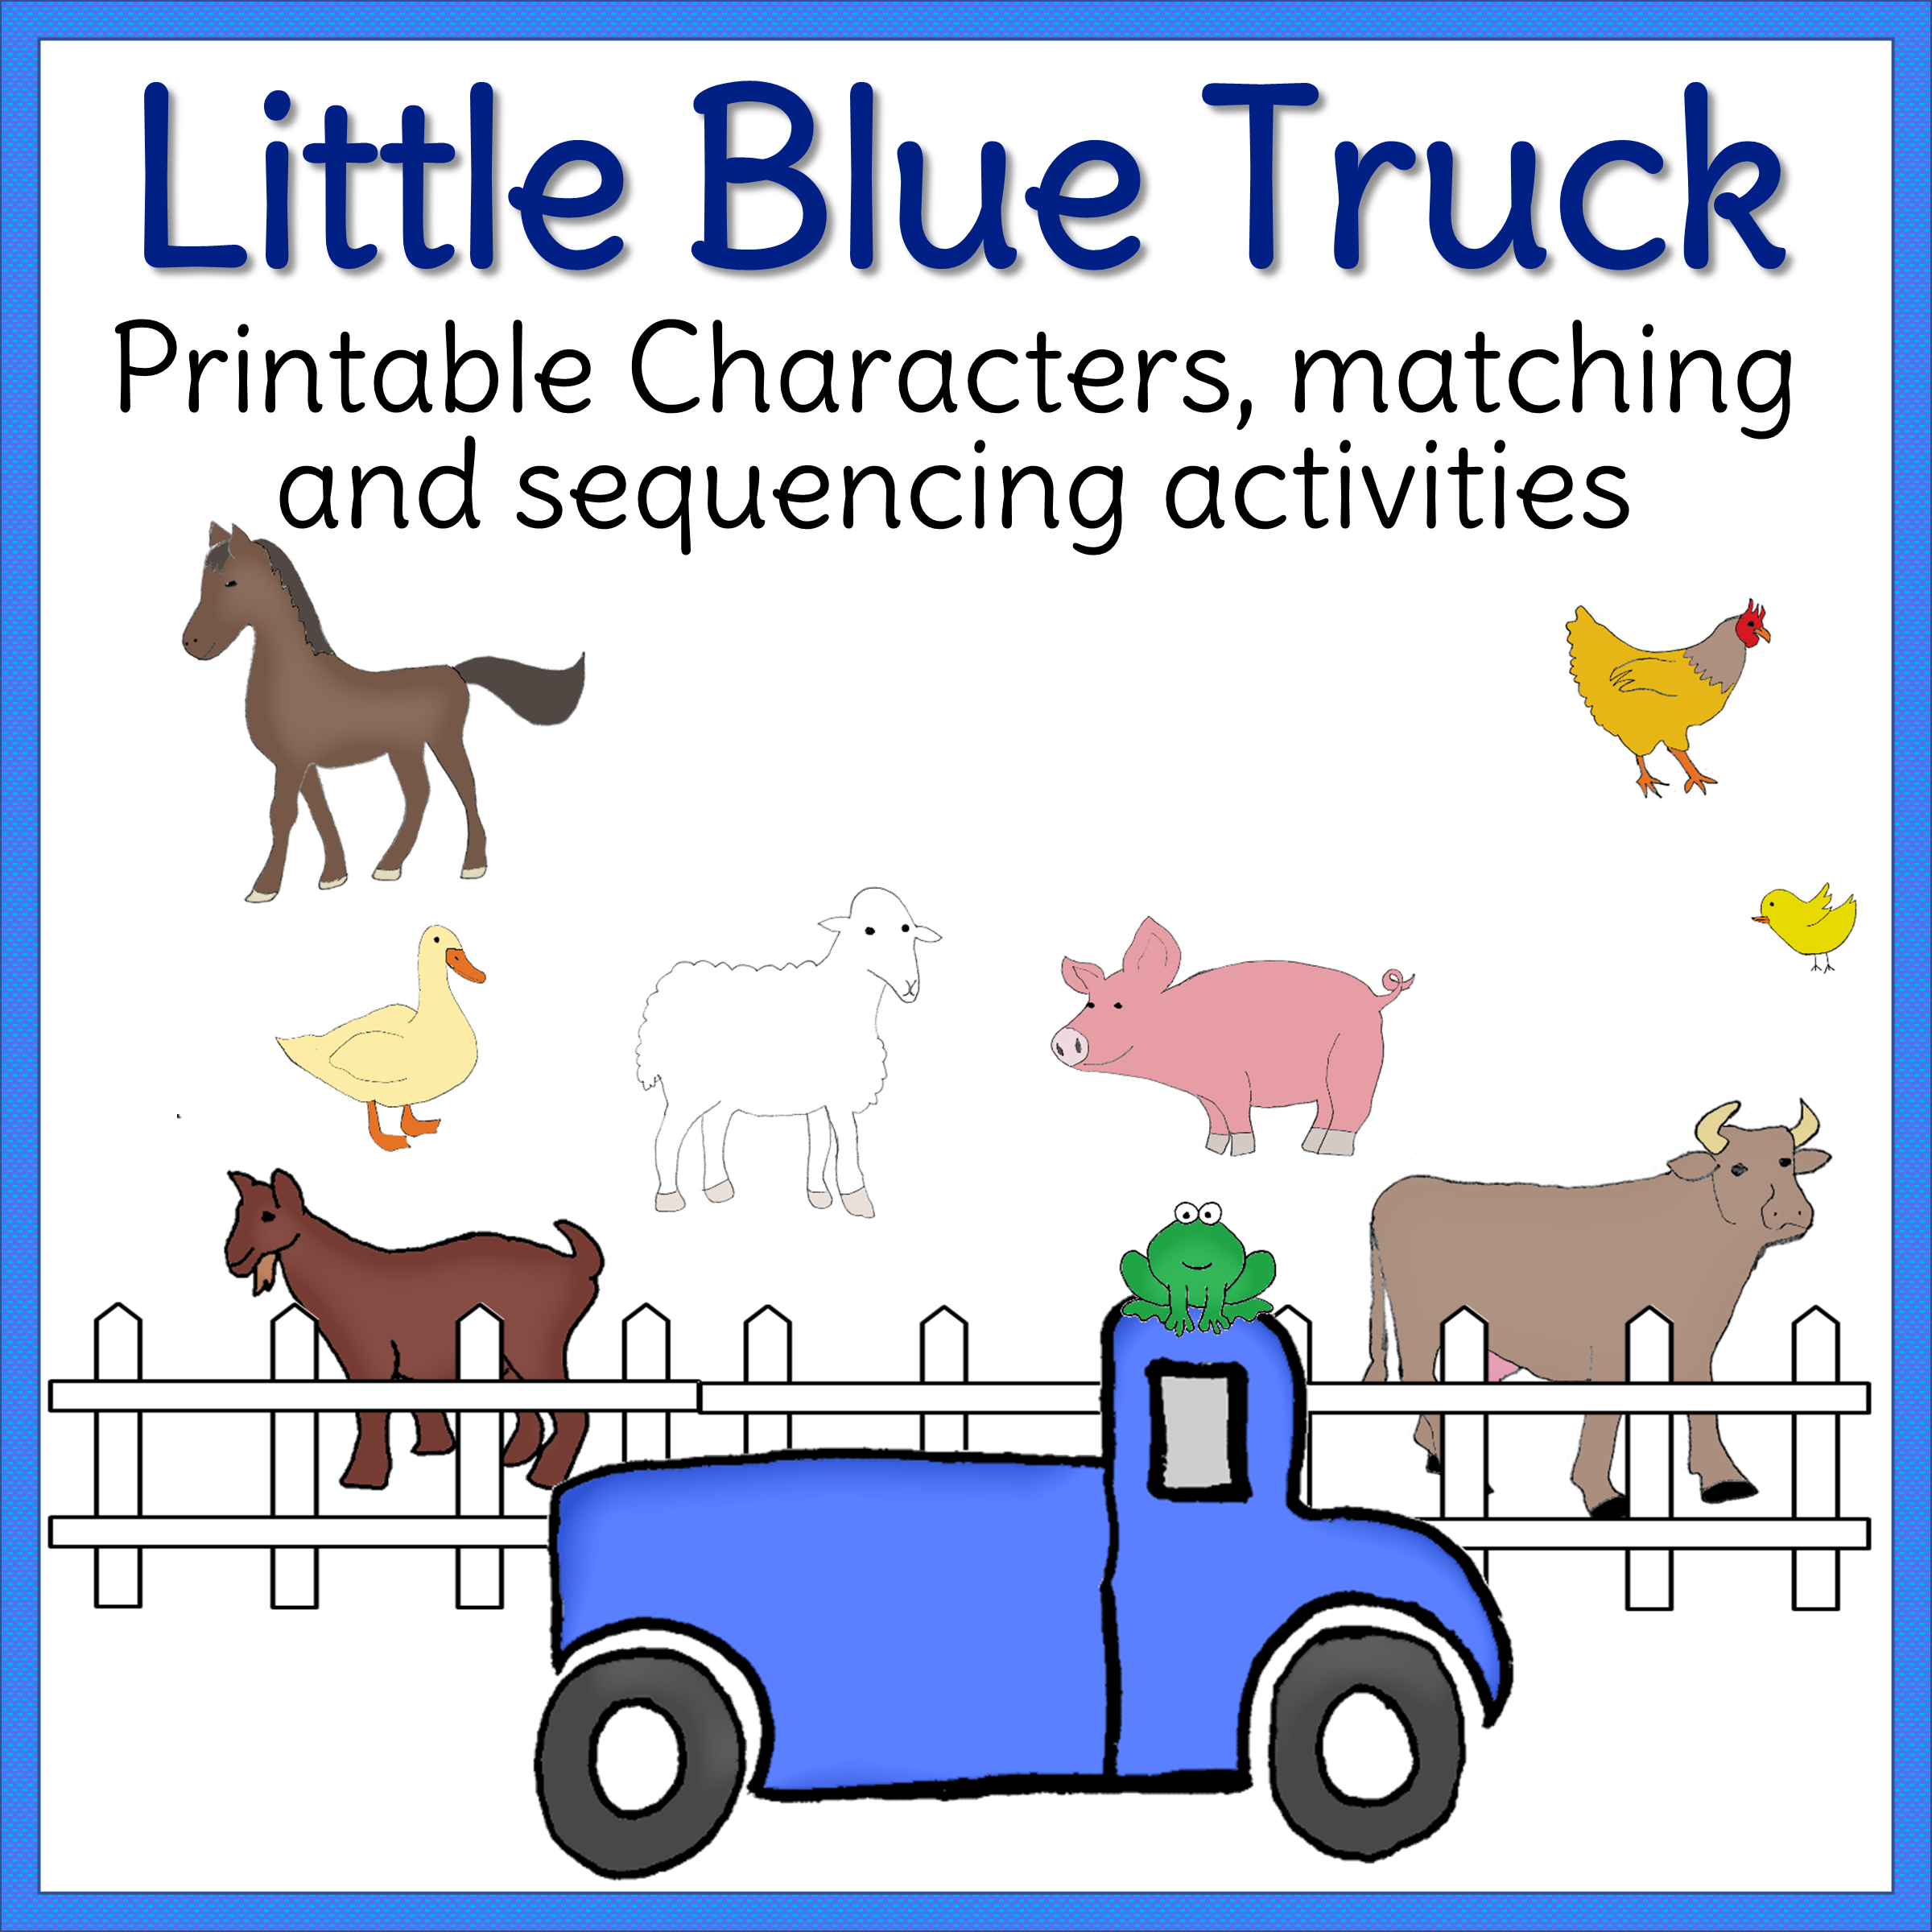 Little Blue Truck Activities - Beyond Mommying throughout Little Blue Truck Free Printables